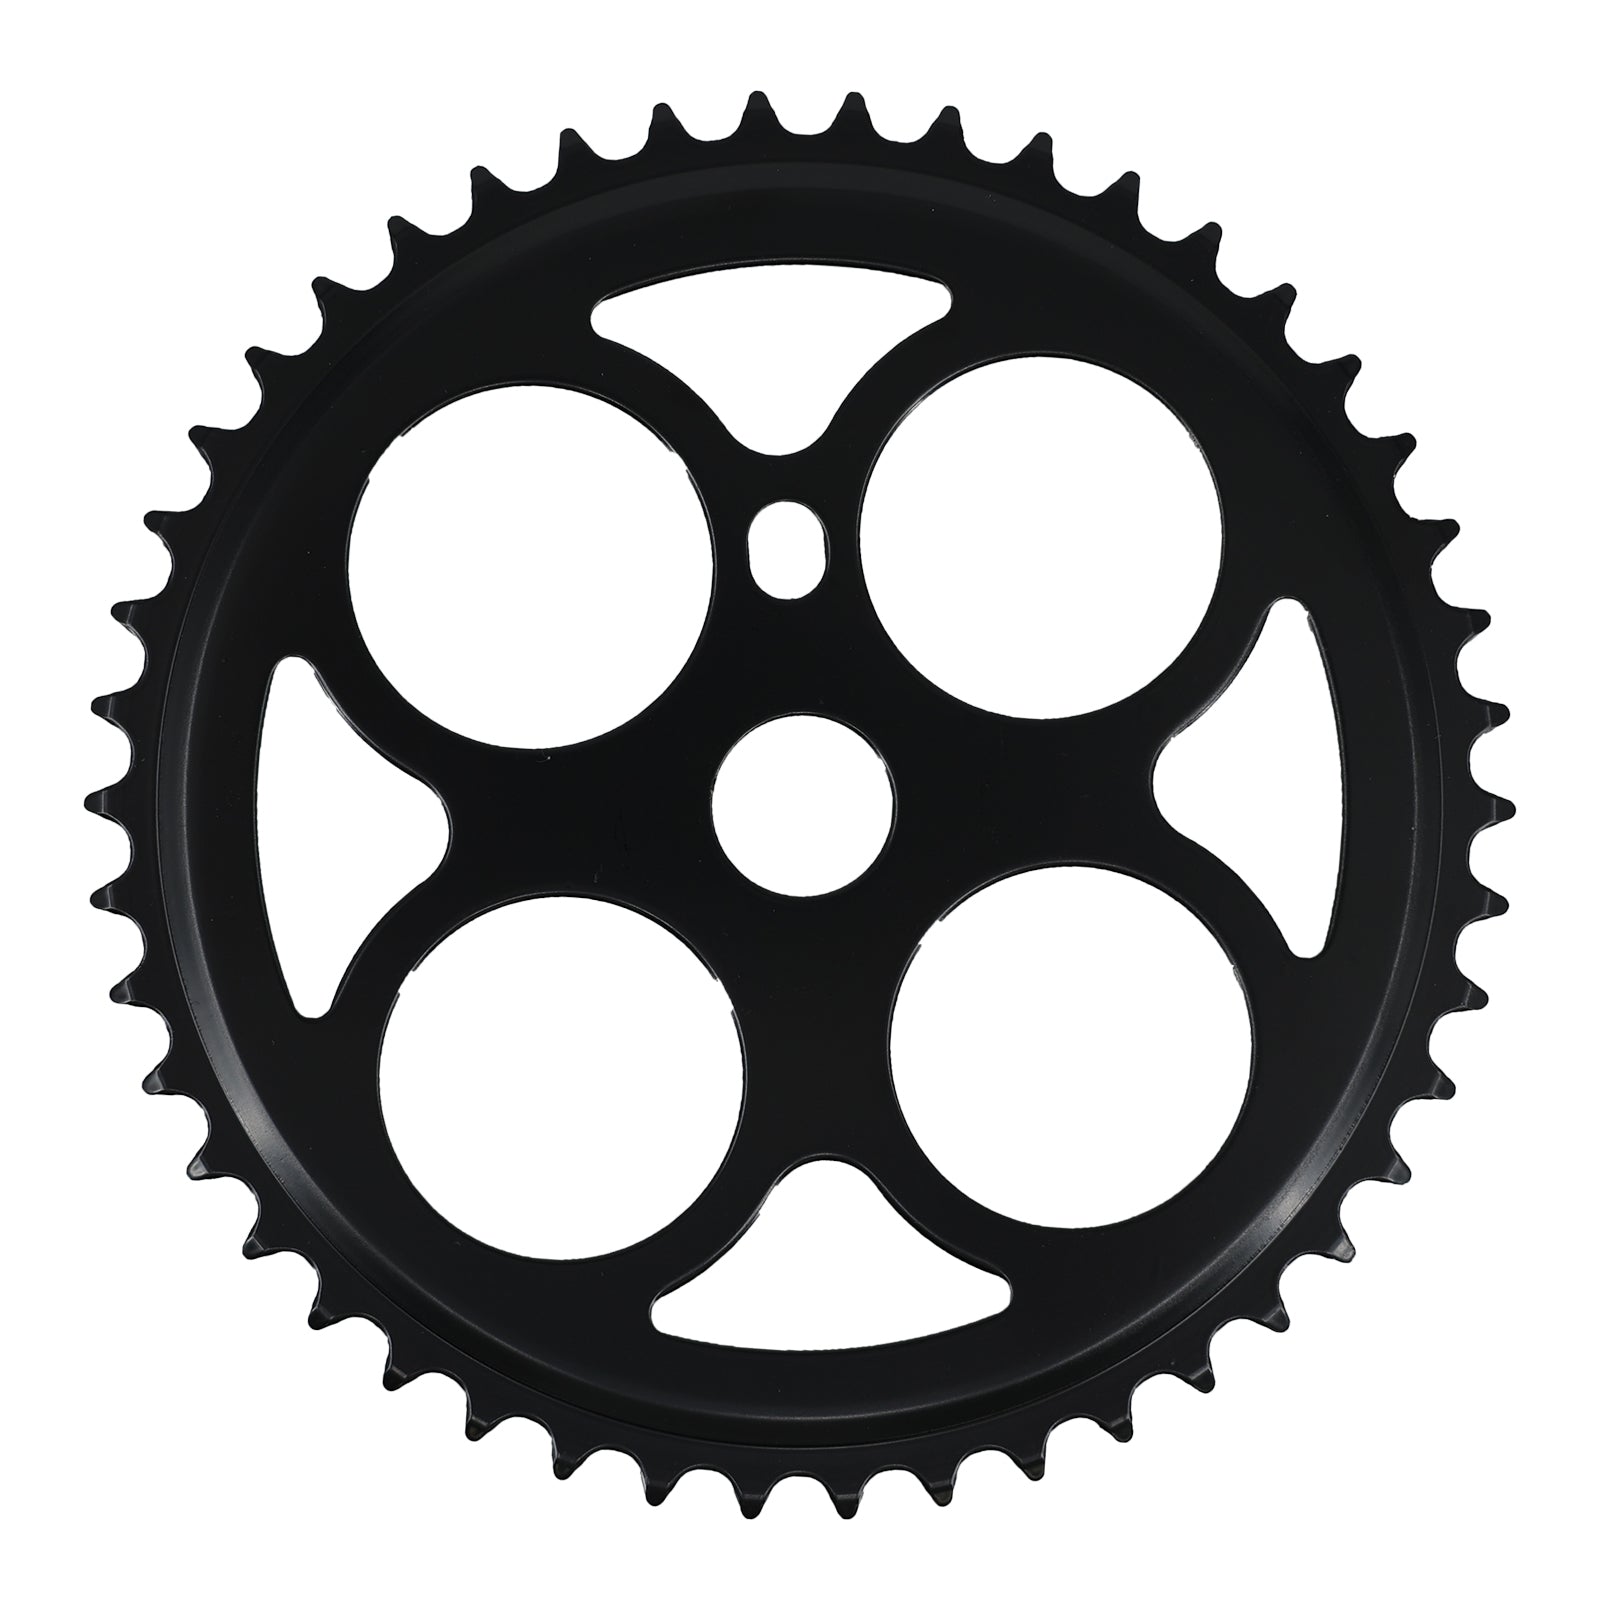 Tracer GS Series Chainwheels Single Speed multiple shape and Chrome/Black available